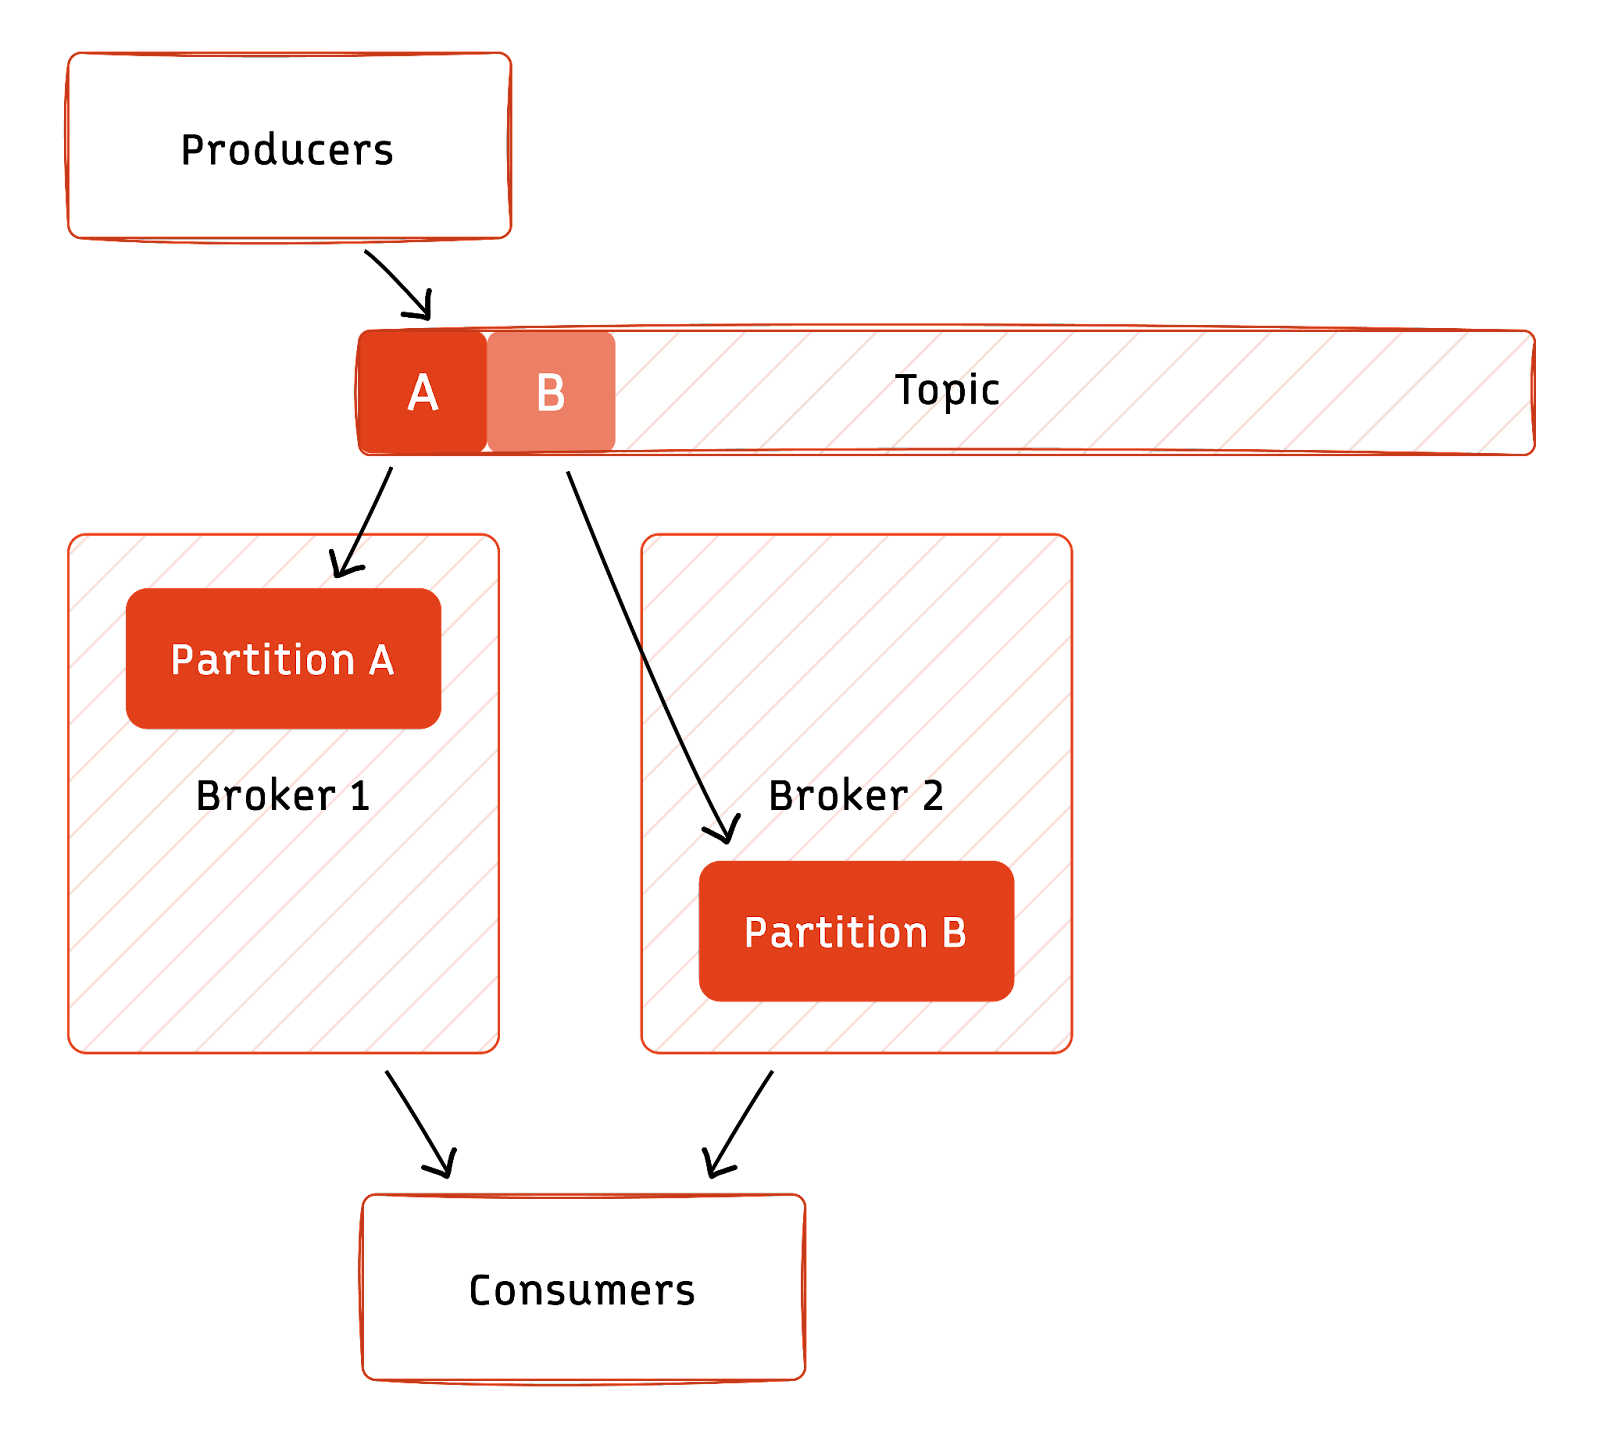 Partitioning in event streaming systems